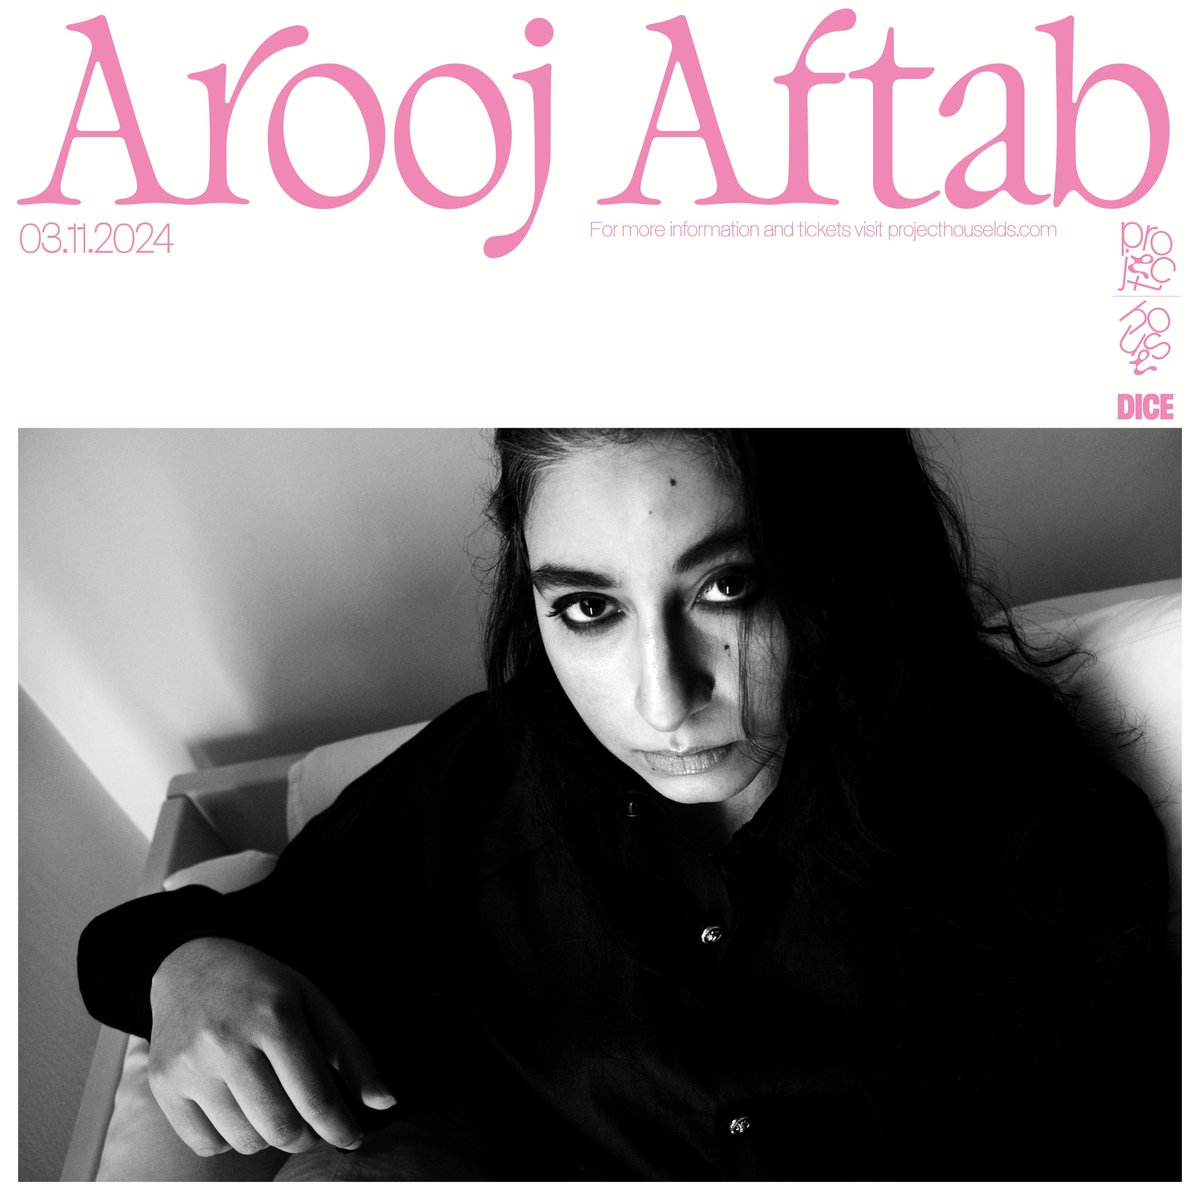 New Show: @brudepresents brings Grammy Award-winning artist @arooj_aftab to Project House 03.11. Tickets on sale via @dicefm 24.04. Head to the link to set a reminder now! buff.ly/4aQRGKE